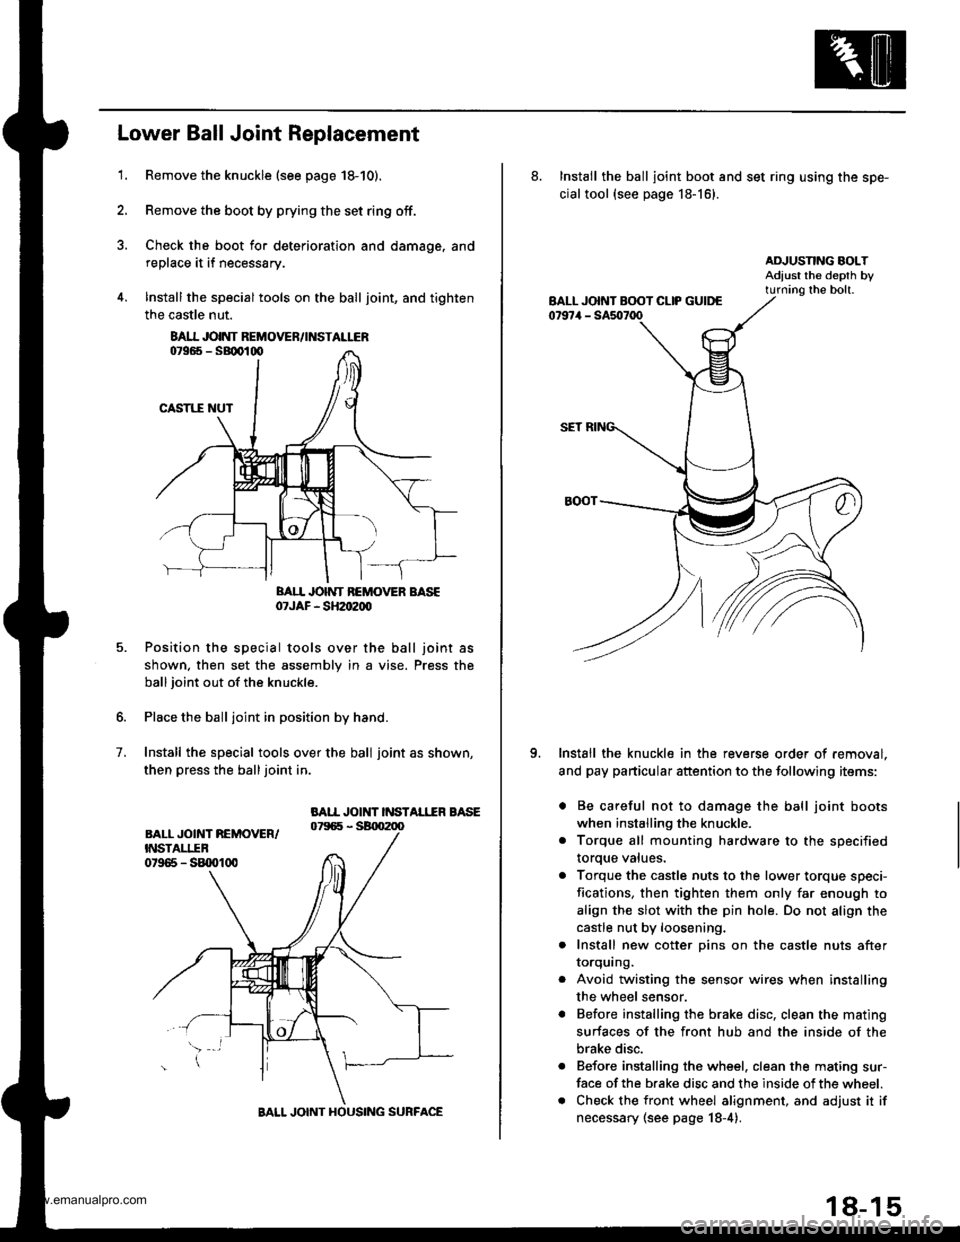 HONDA CR-V 1999 RD1-RD3 / 1.G Owners Manual 
1.
Lower Ball Joint Replacement
Remove the knuckle (see page 18-10).
Remove the boot by prying the set ring off.
Check the boot for deterioration and damage. and
replace it if necessary.
lnstall the